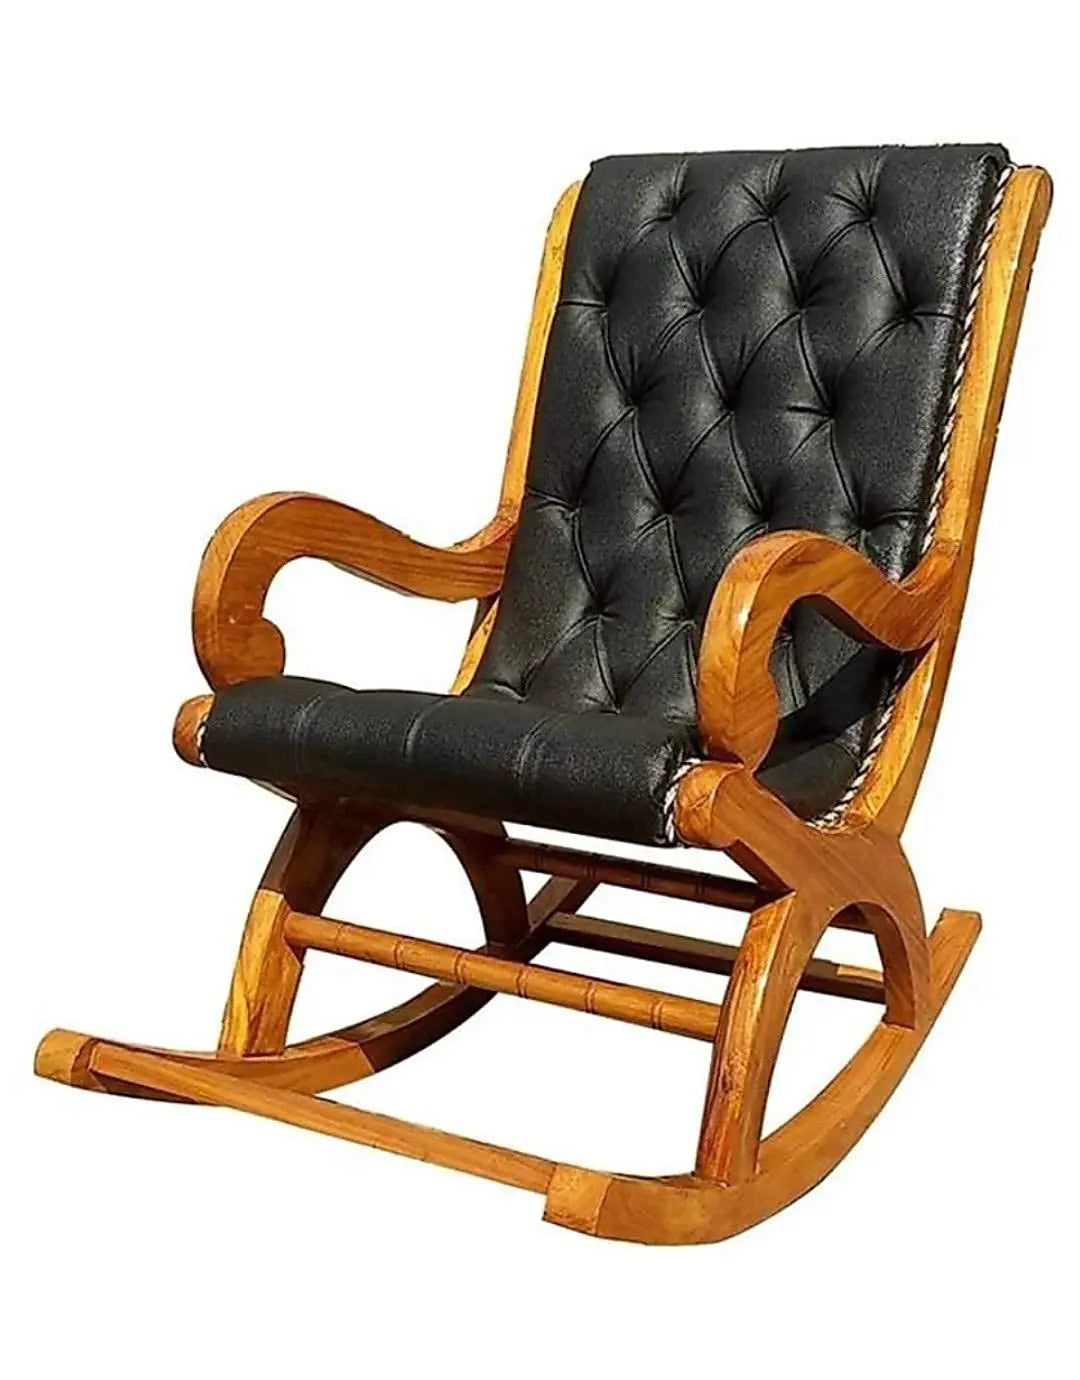 Rocking chair Cavy- Comfortable Well Cushioned Wooden Rocking Chair with Footrest | Mid-Century Rocking Chair for All with Soft, Durable Cushioned and Quality Fabric for Home & Office Furneez